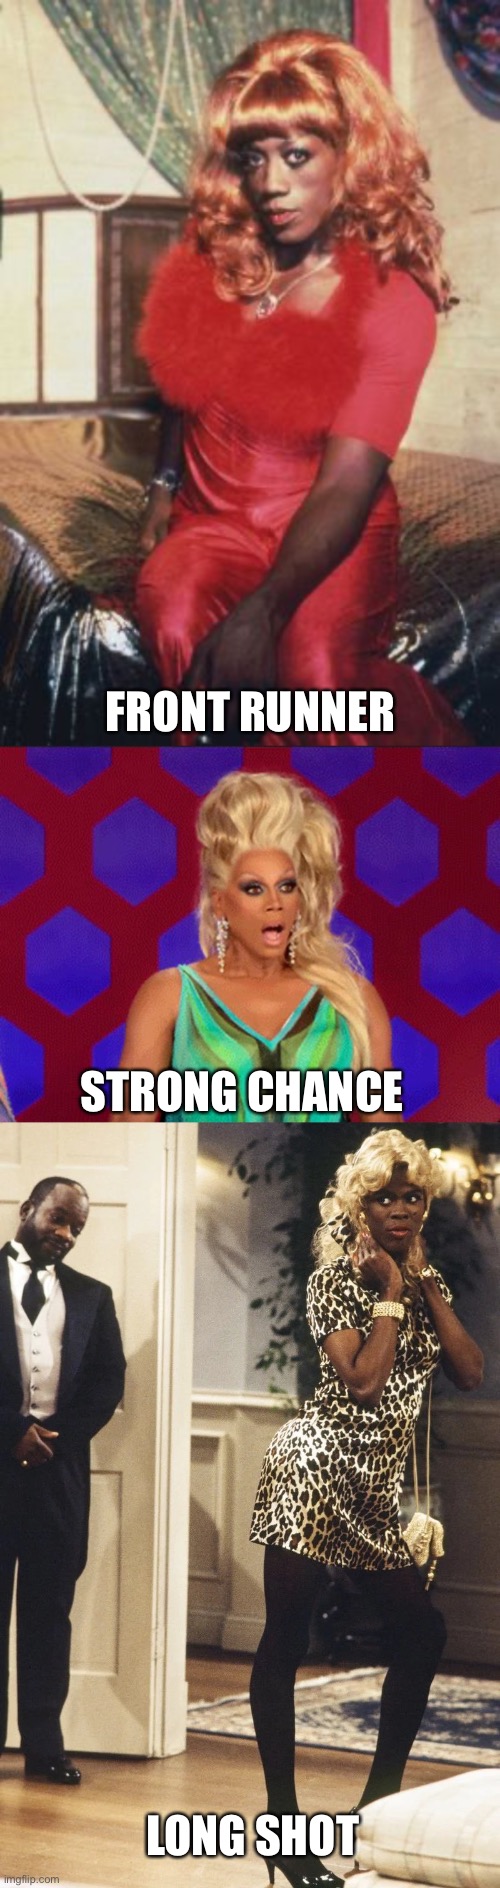 FRONT RUNNER STRONG CHANCE LONG SHOT | image tagged in ru paul | made w/ Imgflip meme maker